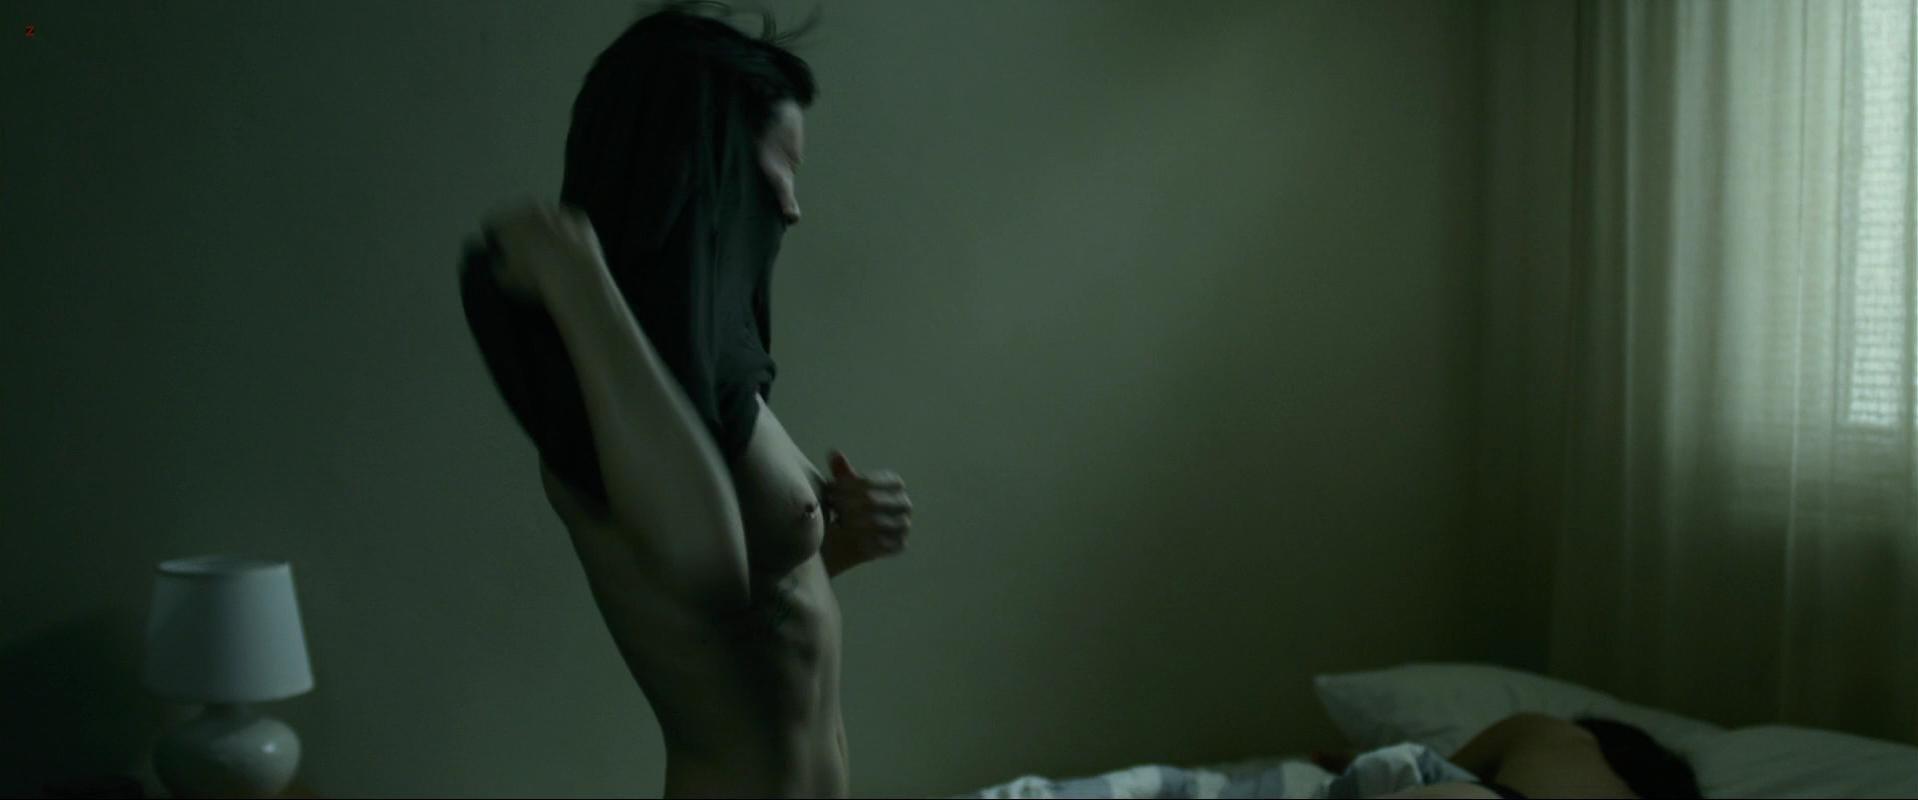 Rooney Mara nude - The Girl with the Dragon Tattoo (2011)